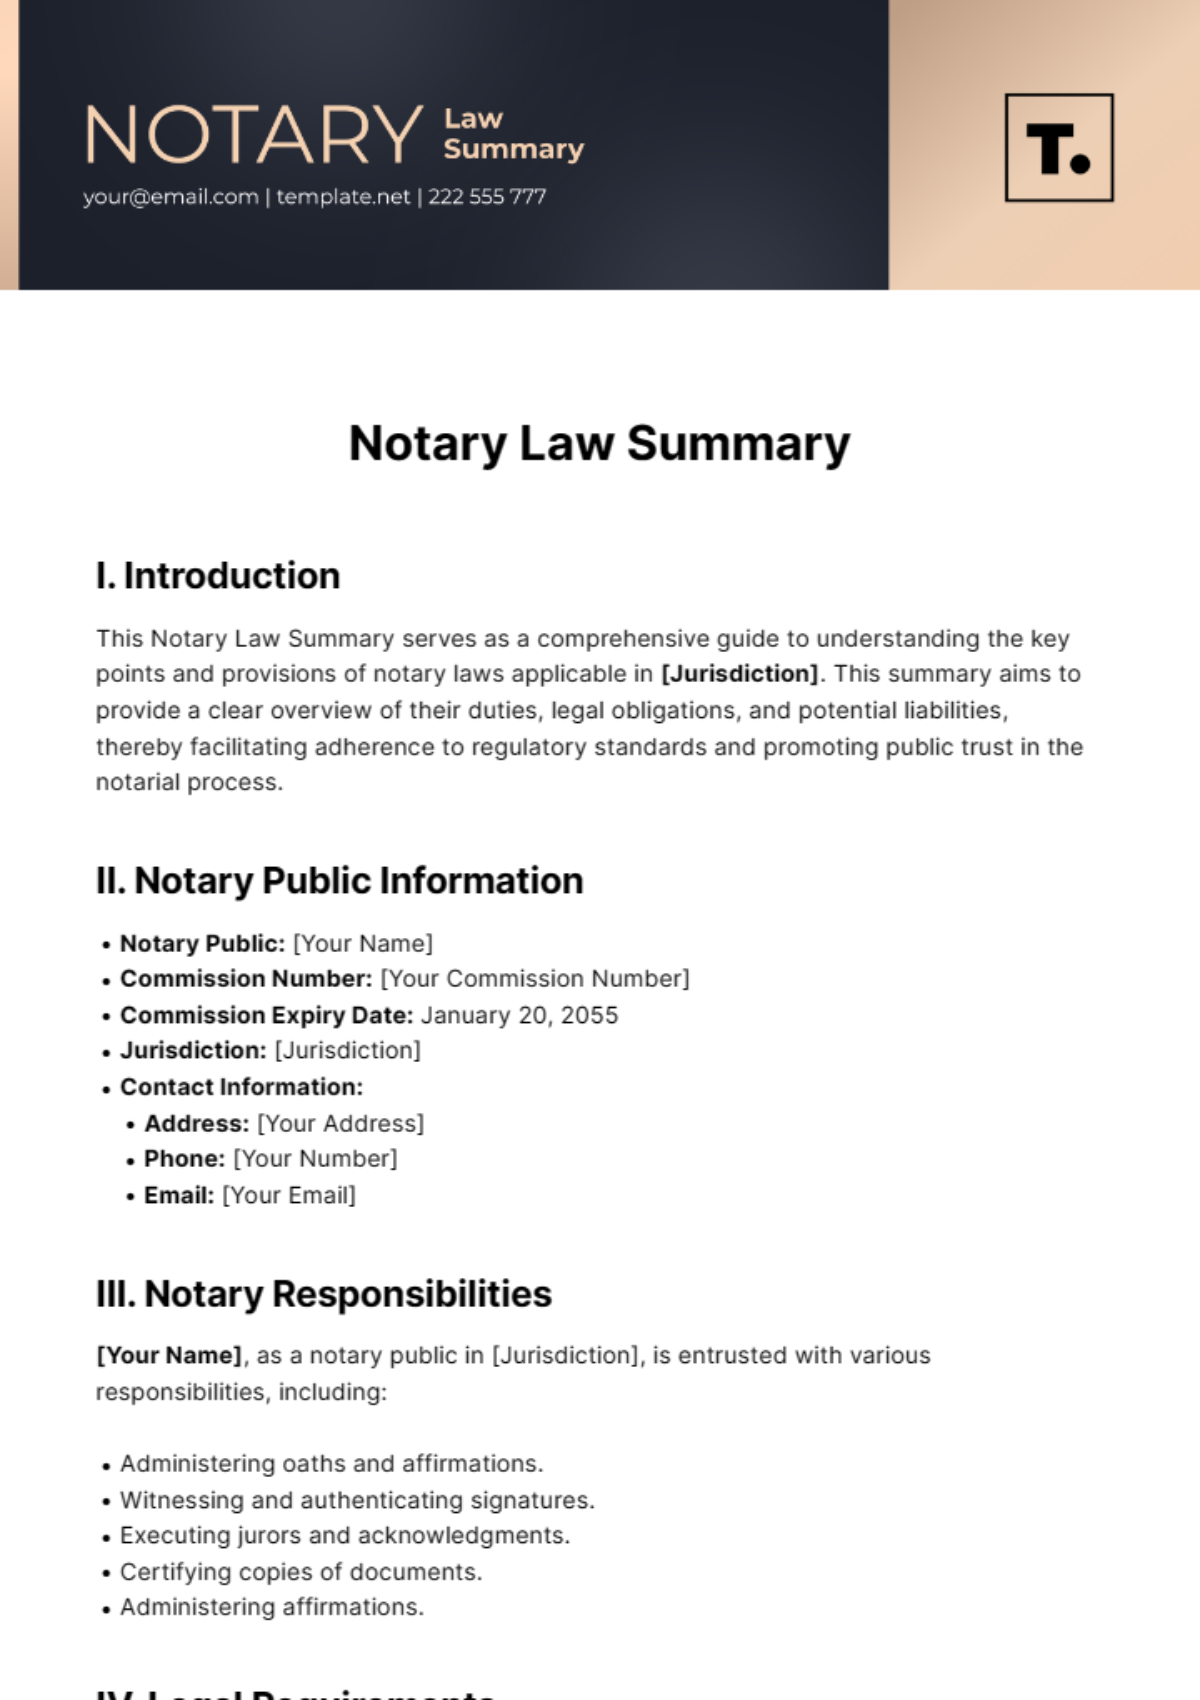 Free Notary Law Summary Template